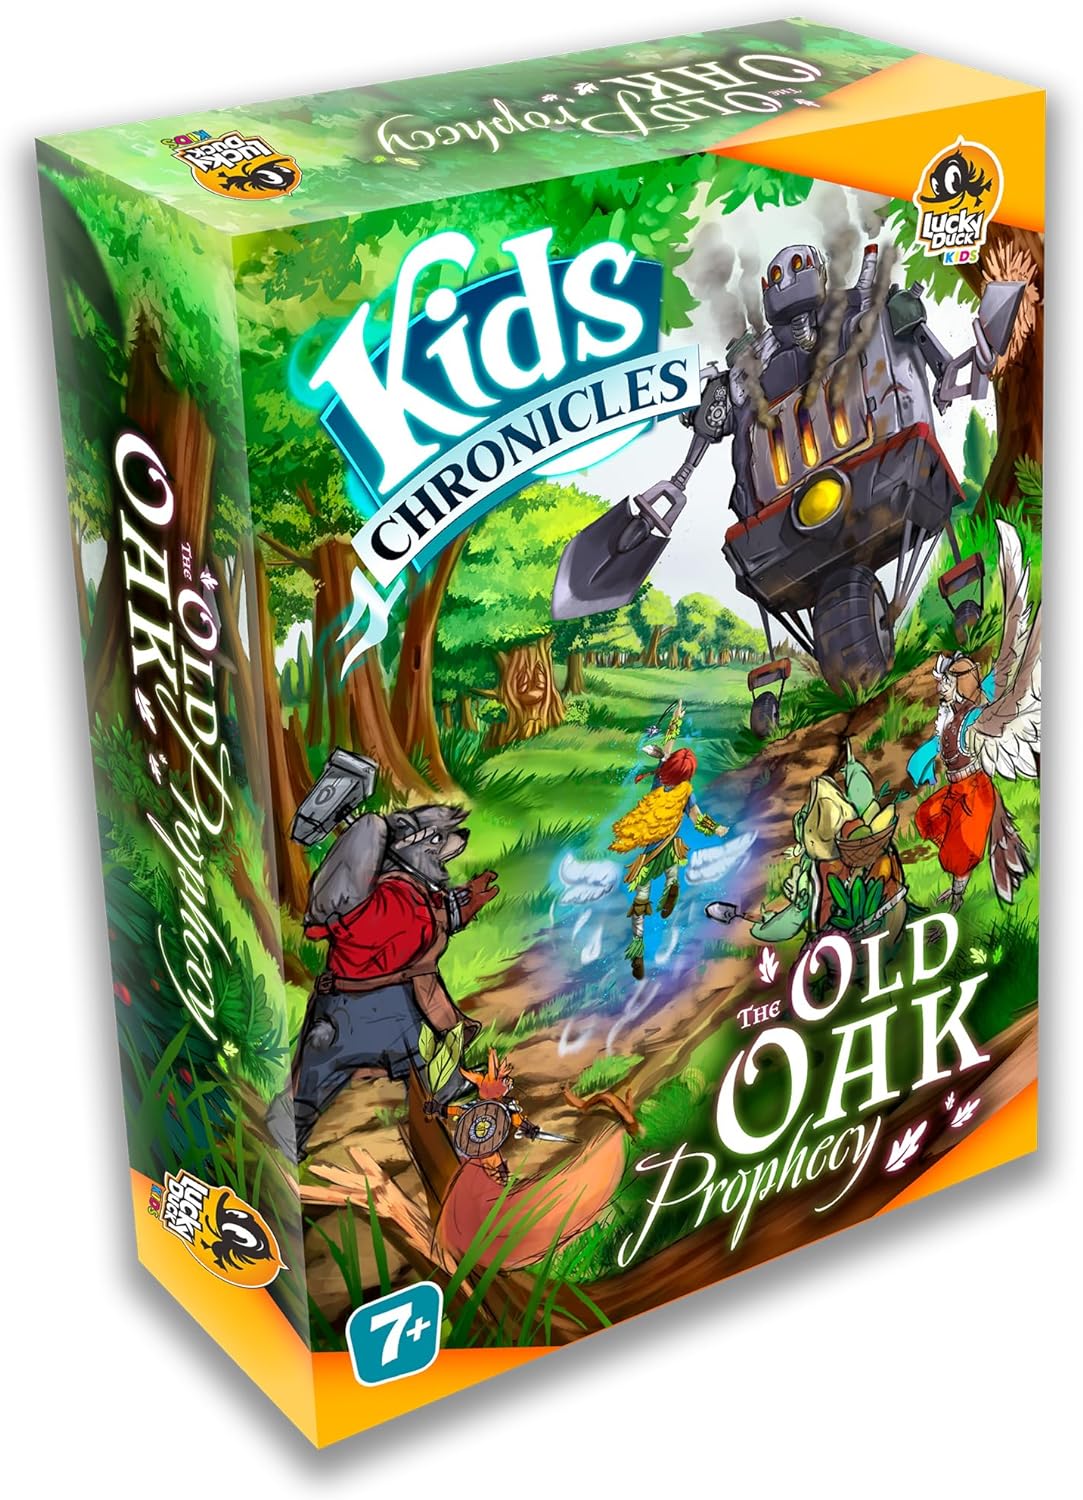 Kids' Chronicles: The Old Oak Prophecy